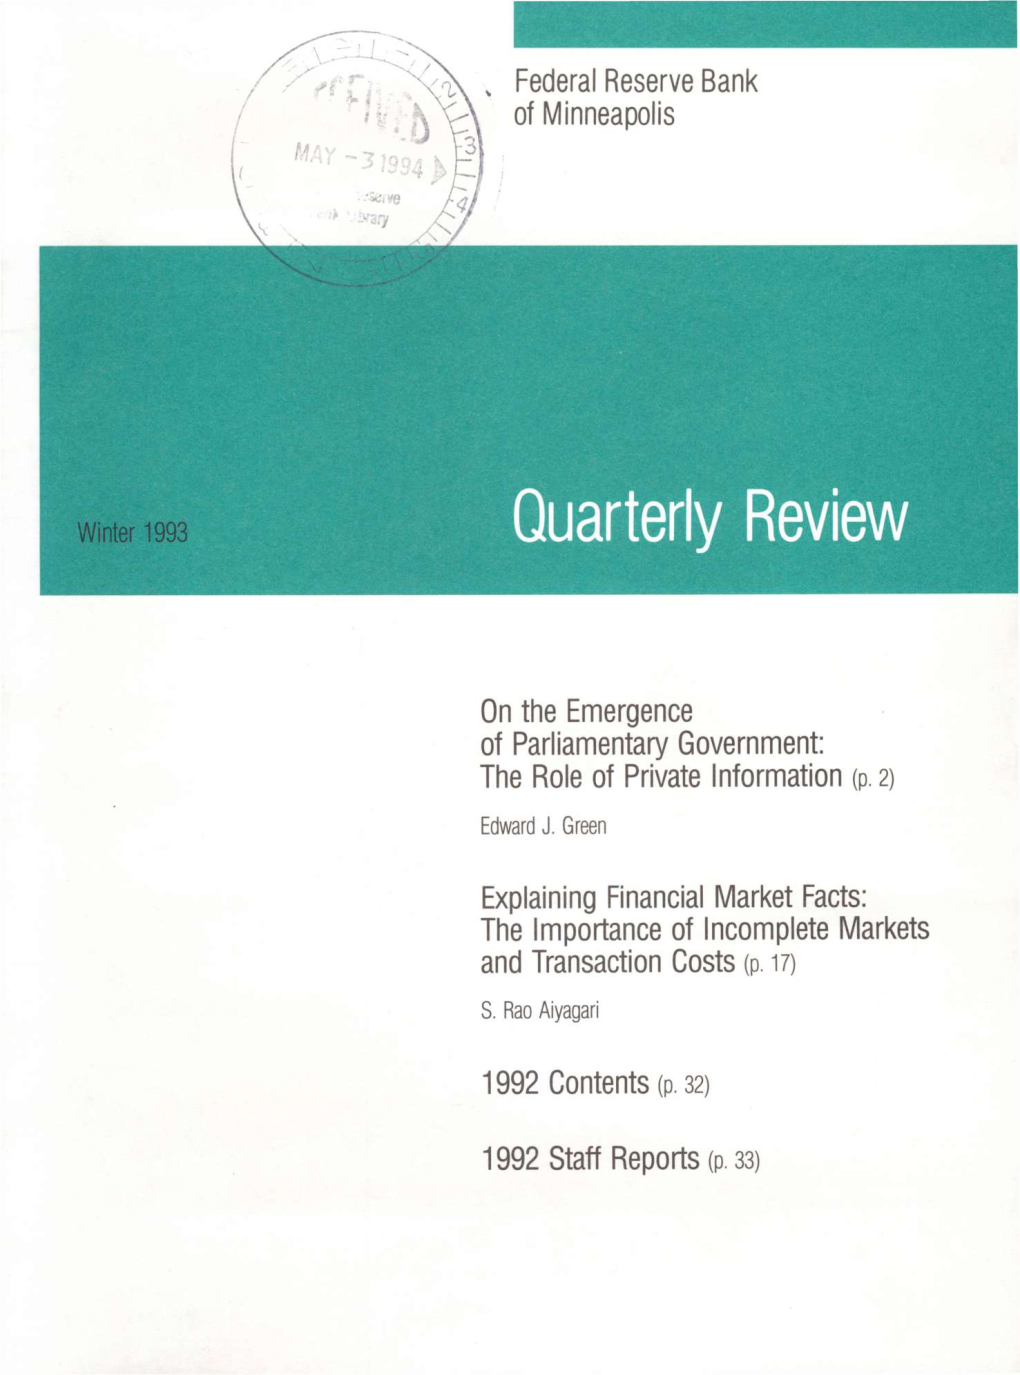 On the Emergence of Parliamentary Government: the Role of Private Information (P